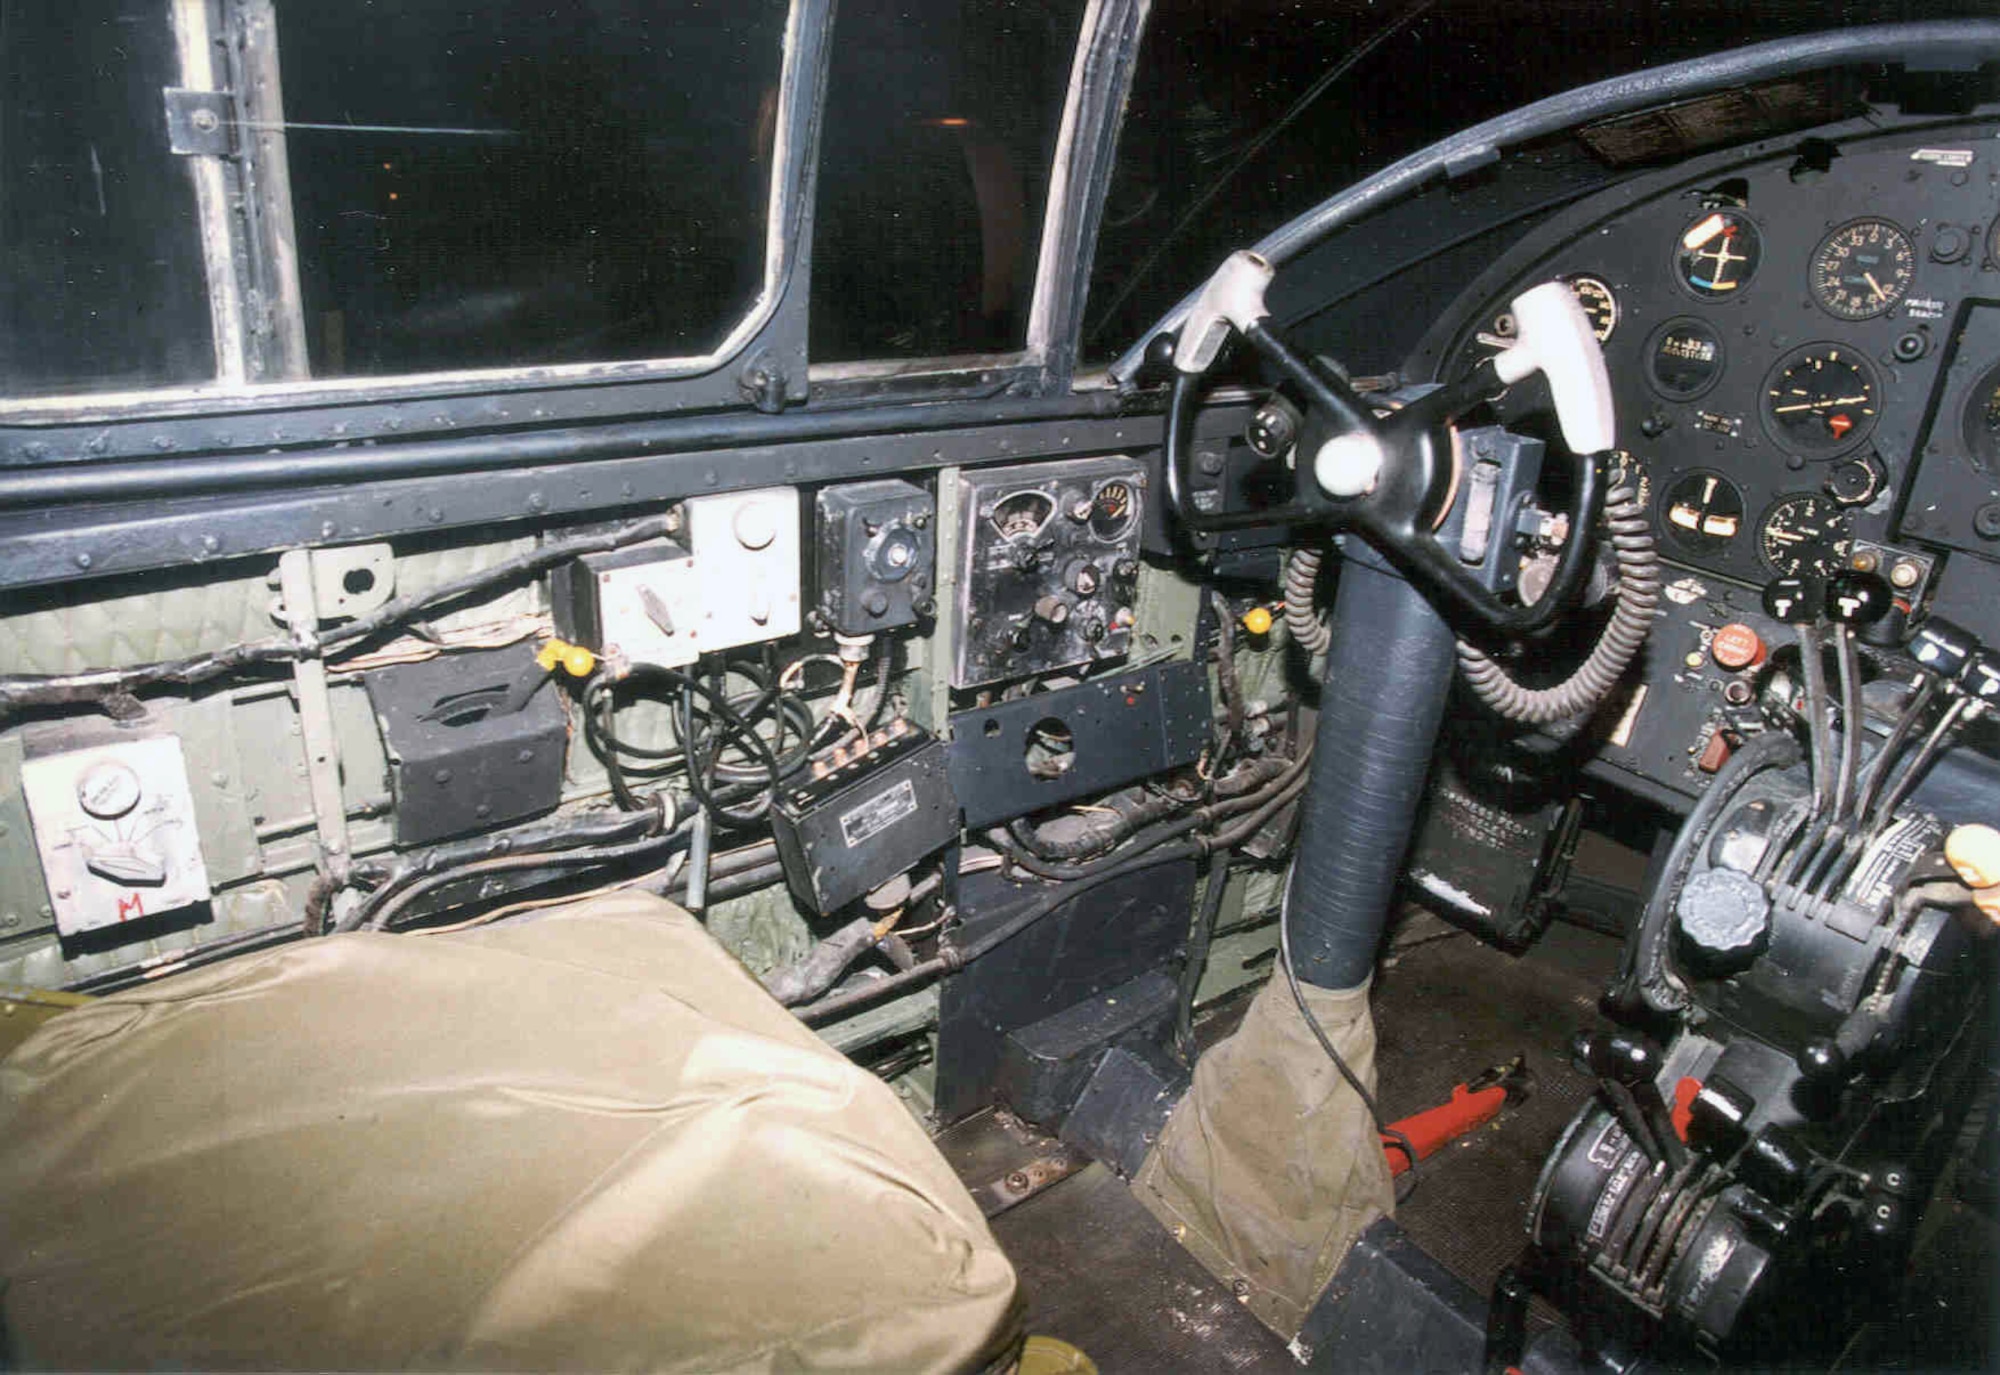 DAYTON, Ohio - North American B-25B Mitchell cockpit at the National Museum of the U.S. Air Force. (U.S. Air Force photo)